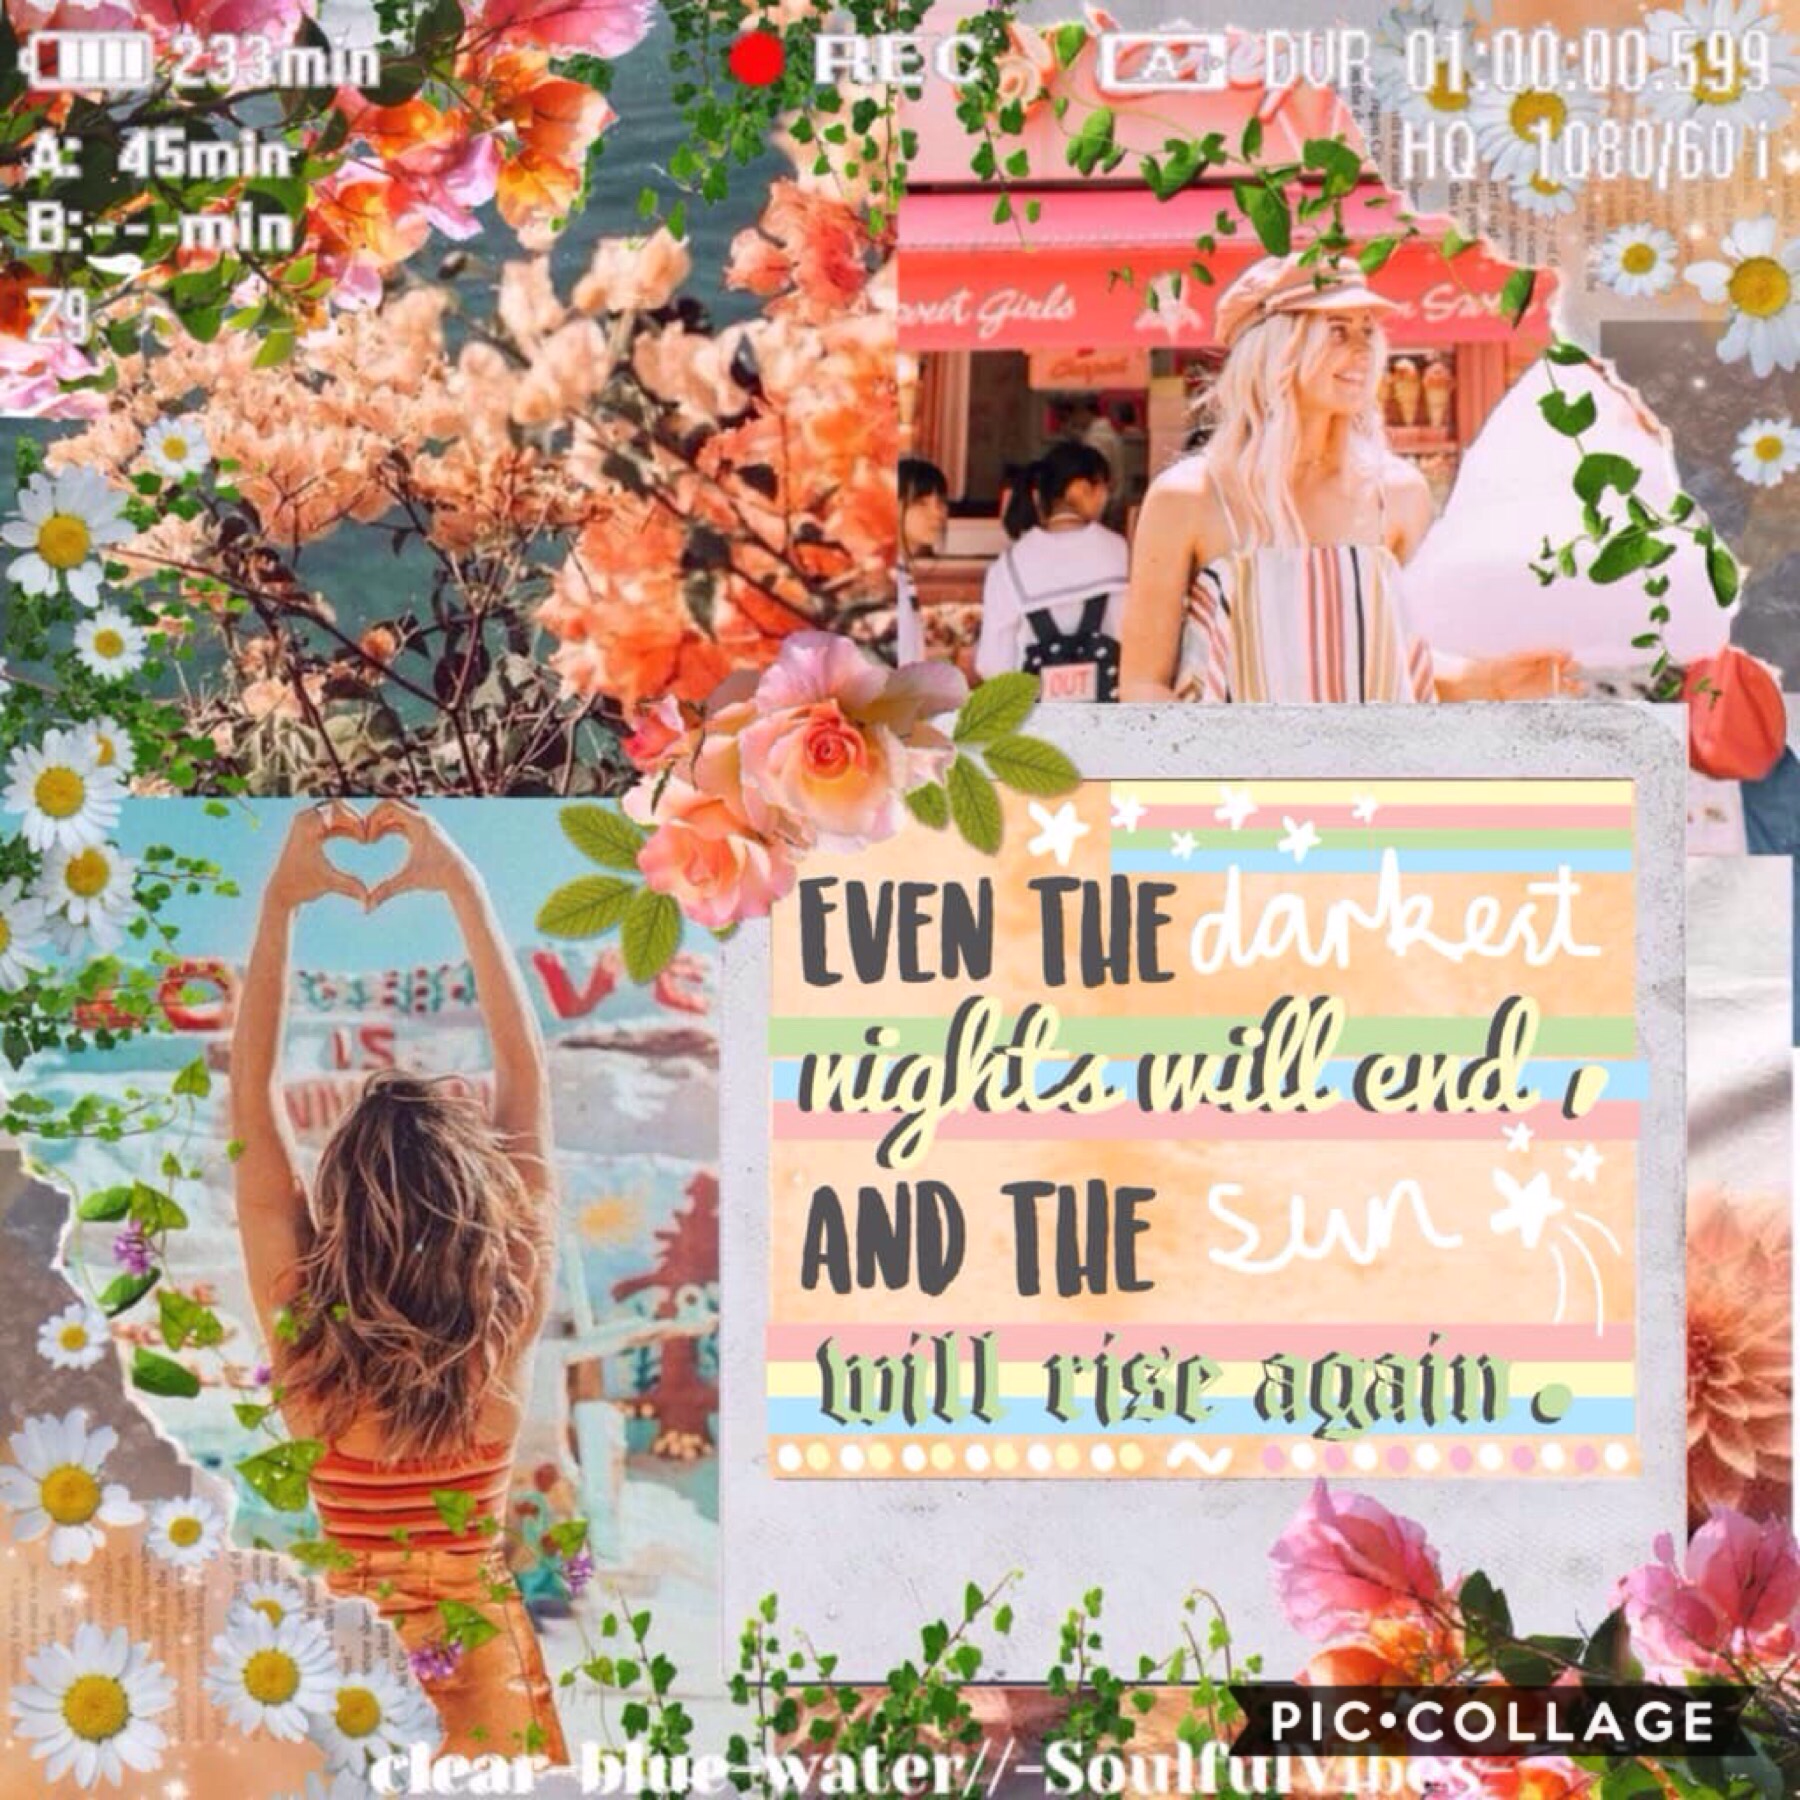 🌿T A P🌿
Collab with the amazing -SoulfulVibes-! She did the gorgeous text and I did the background.
QOTD: What are your five most recent emojis?
AOTD: 🌿💕💙🌊😂
